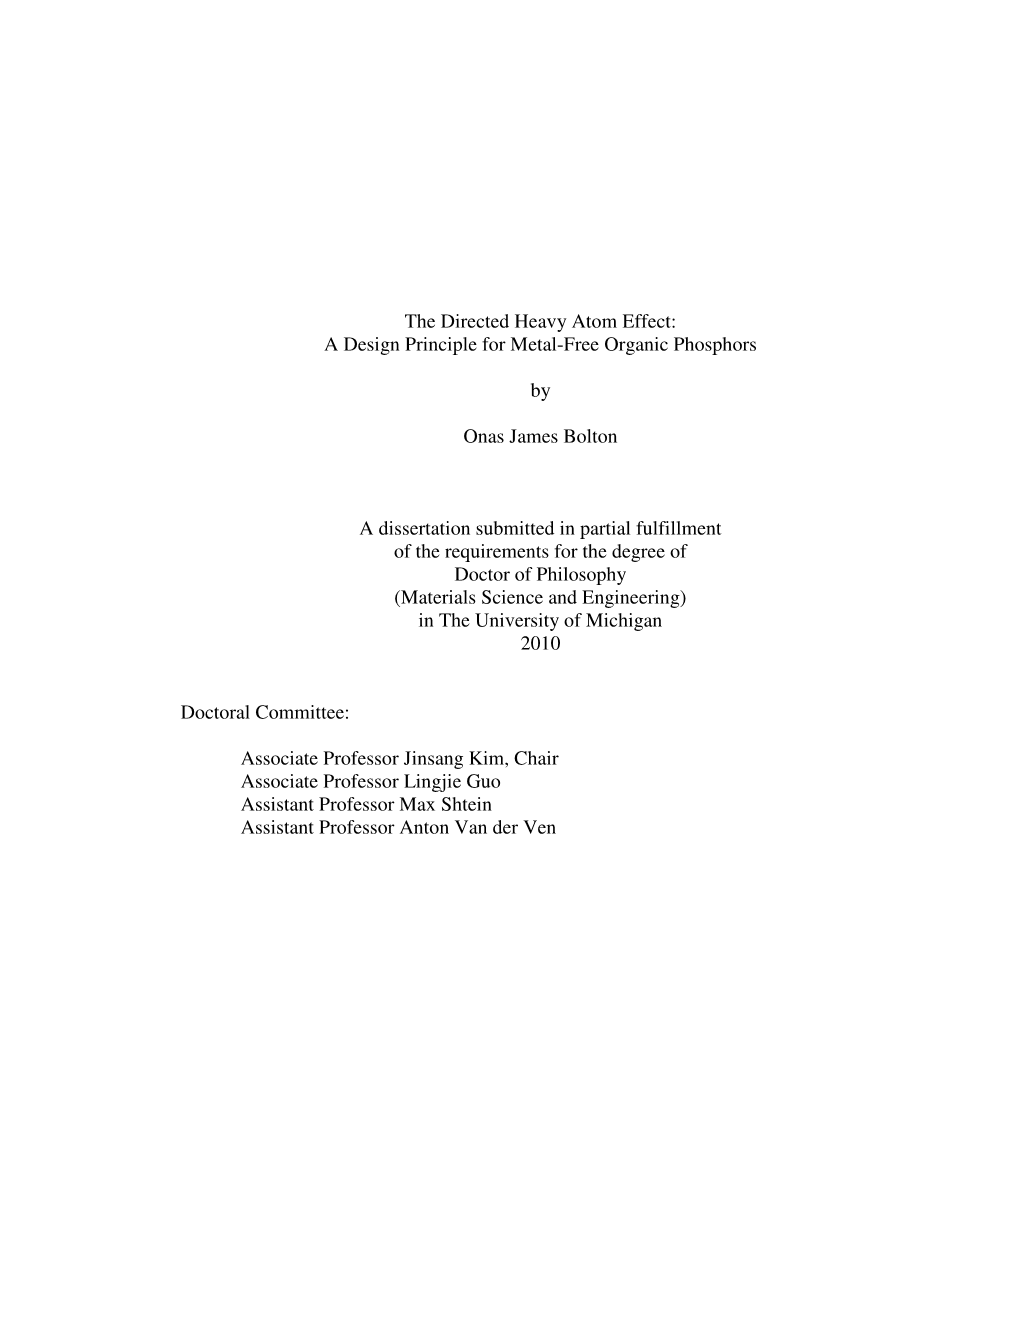 The Directed Heavy Atom Effect: a Design Principle for Metal-Free Organic Phosphors by Onas James Bolton a Dissertation Submitt